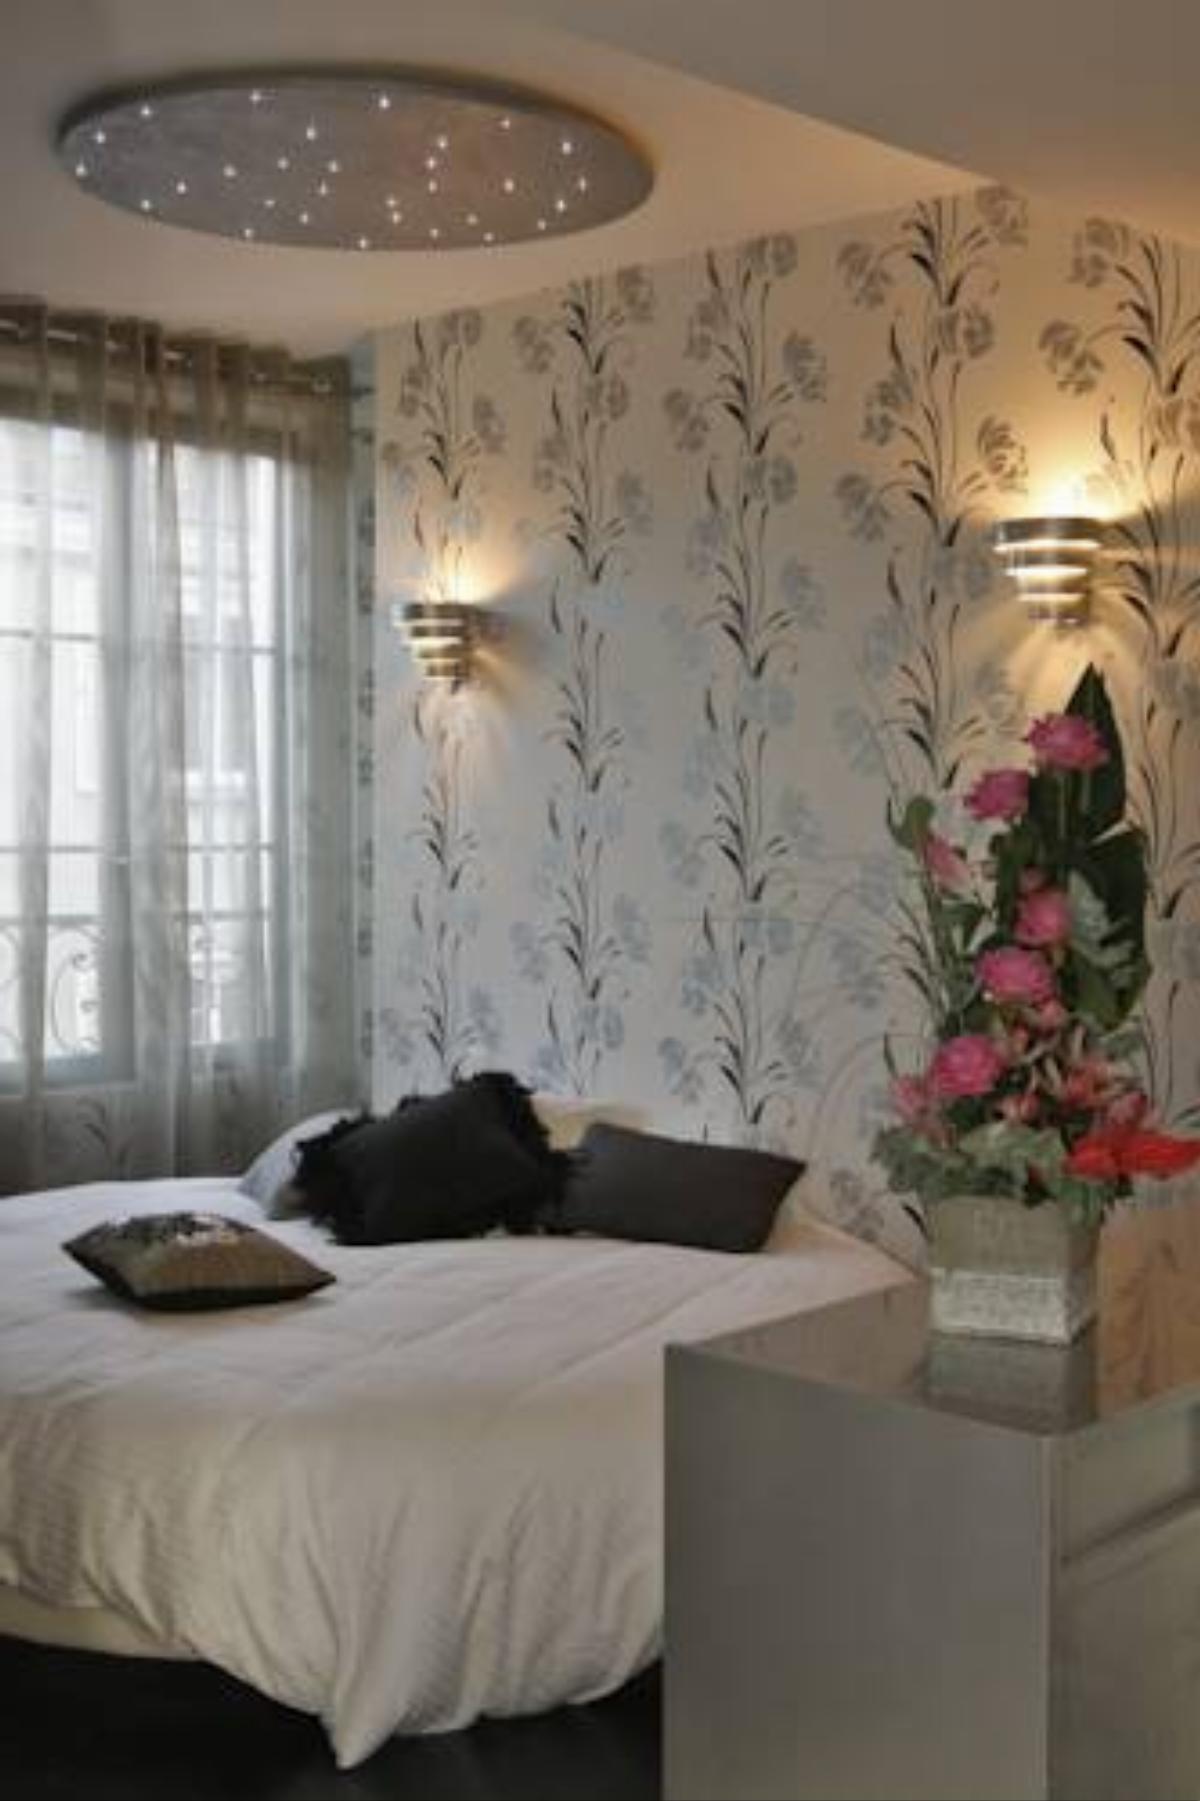 Le Parvis Hotel Chartres France